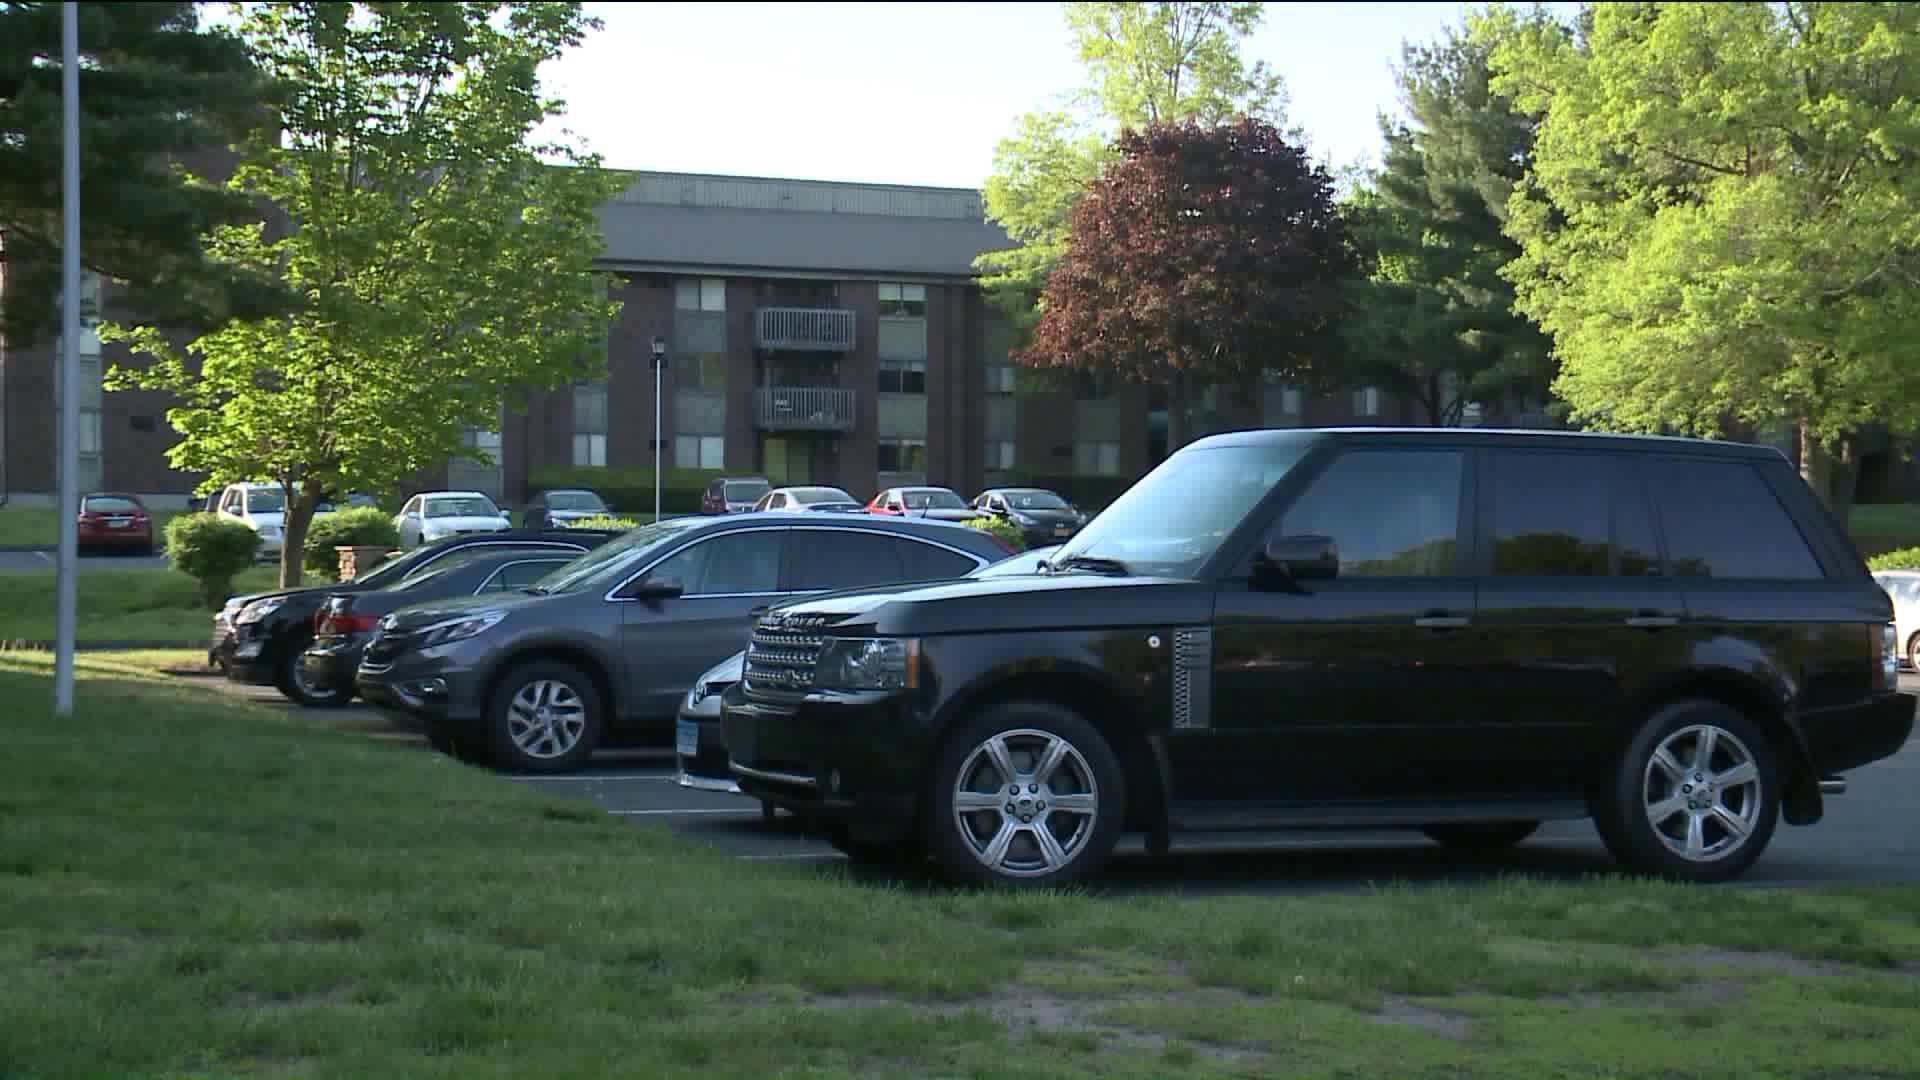 Car thefts continuing to be a trend in Connecticut